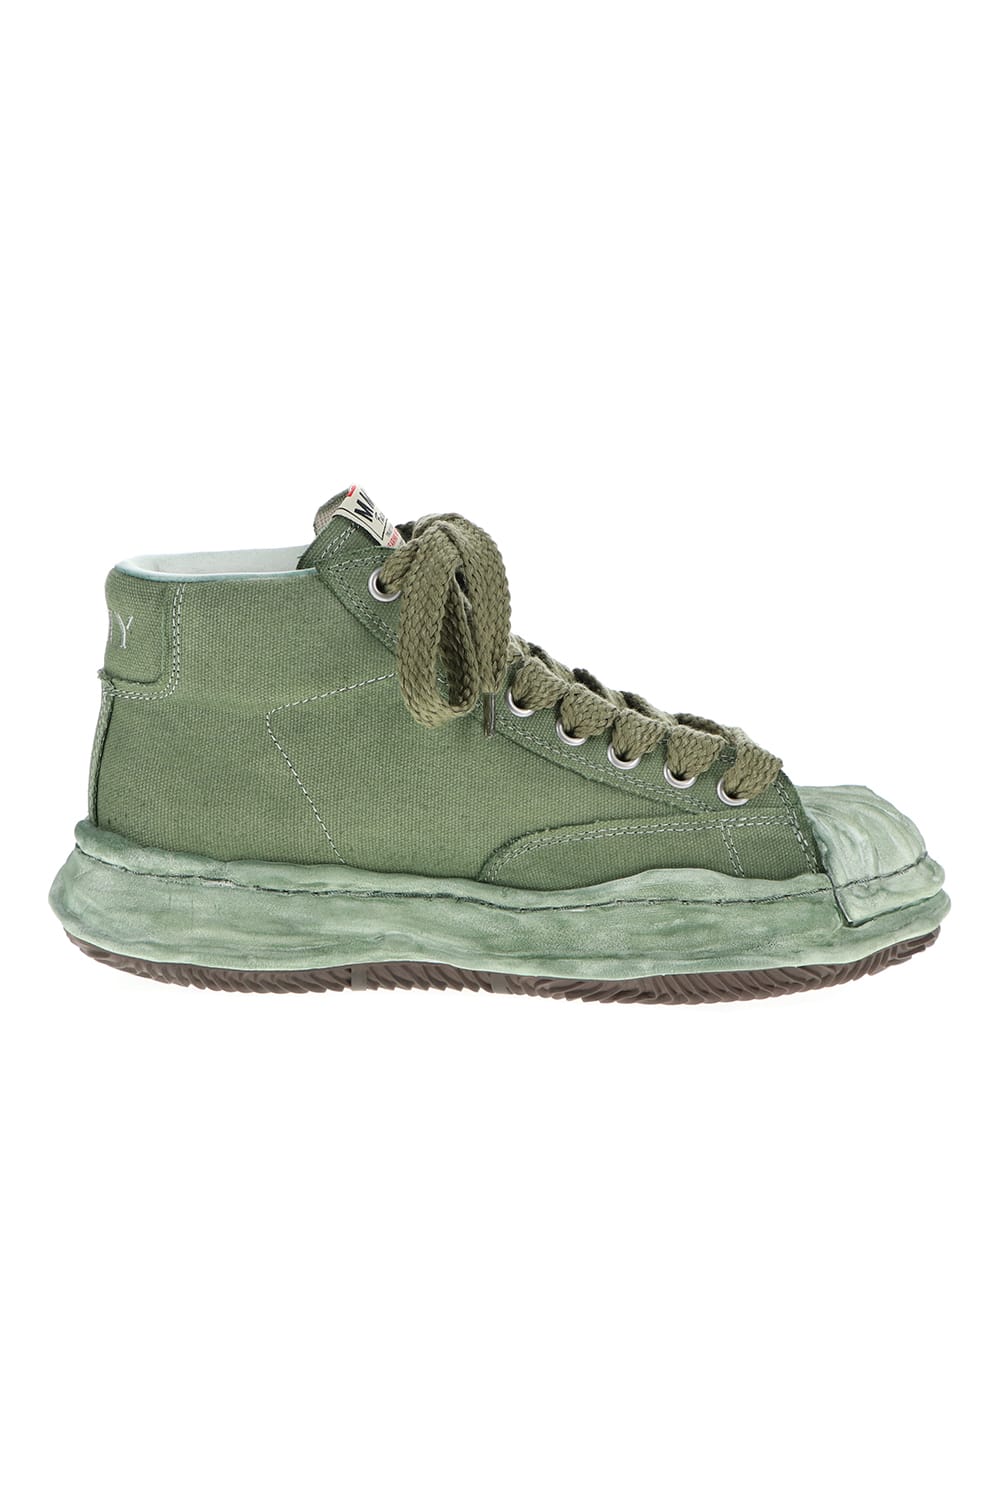 -BLAKEY High- Original STC sole over dyed canvas High-Top sneakers Green